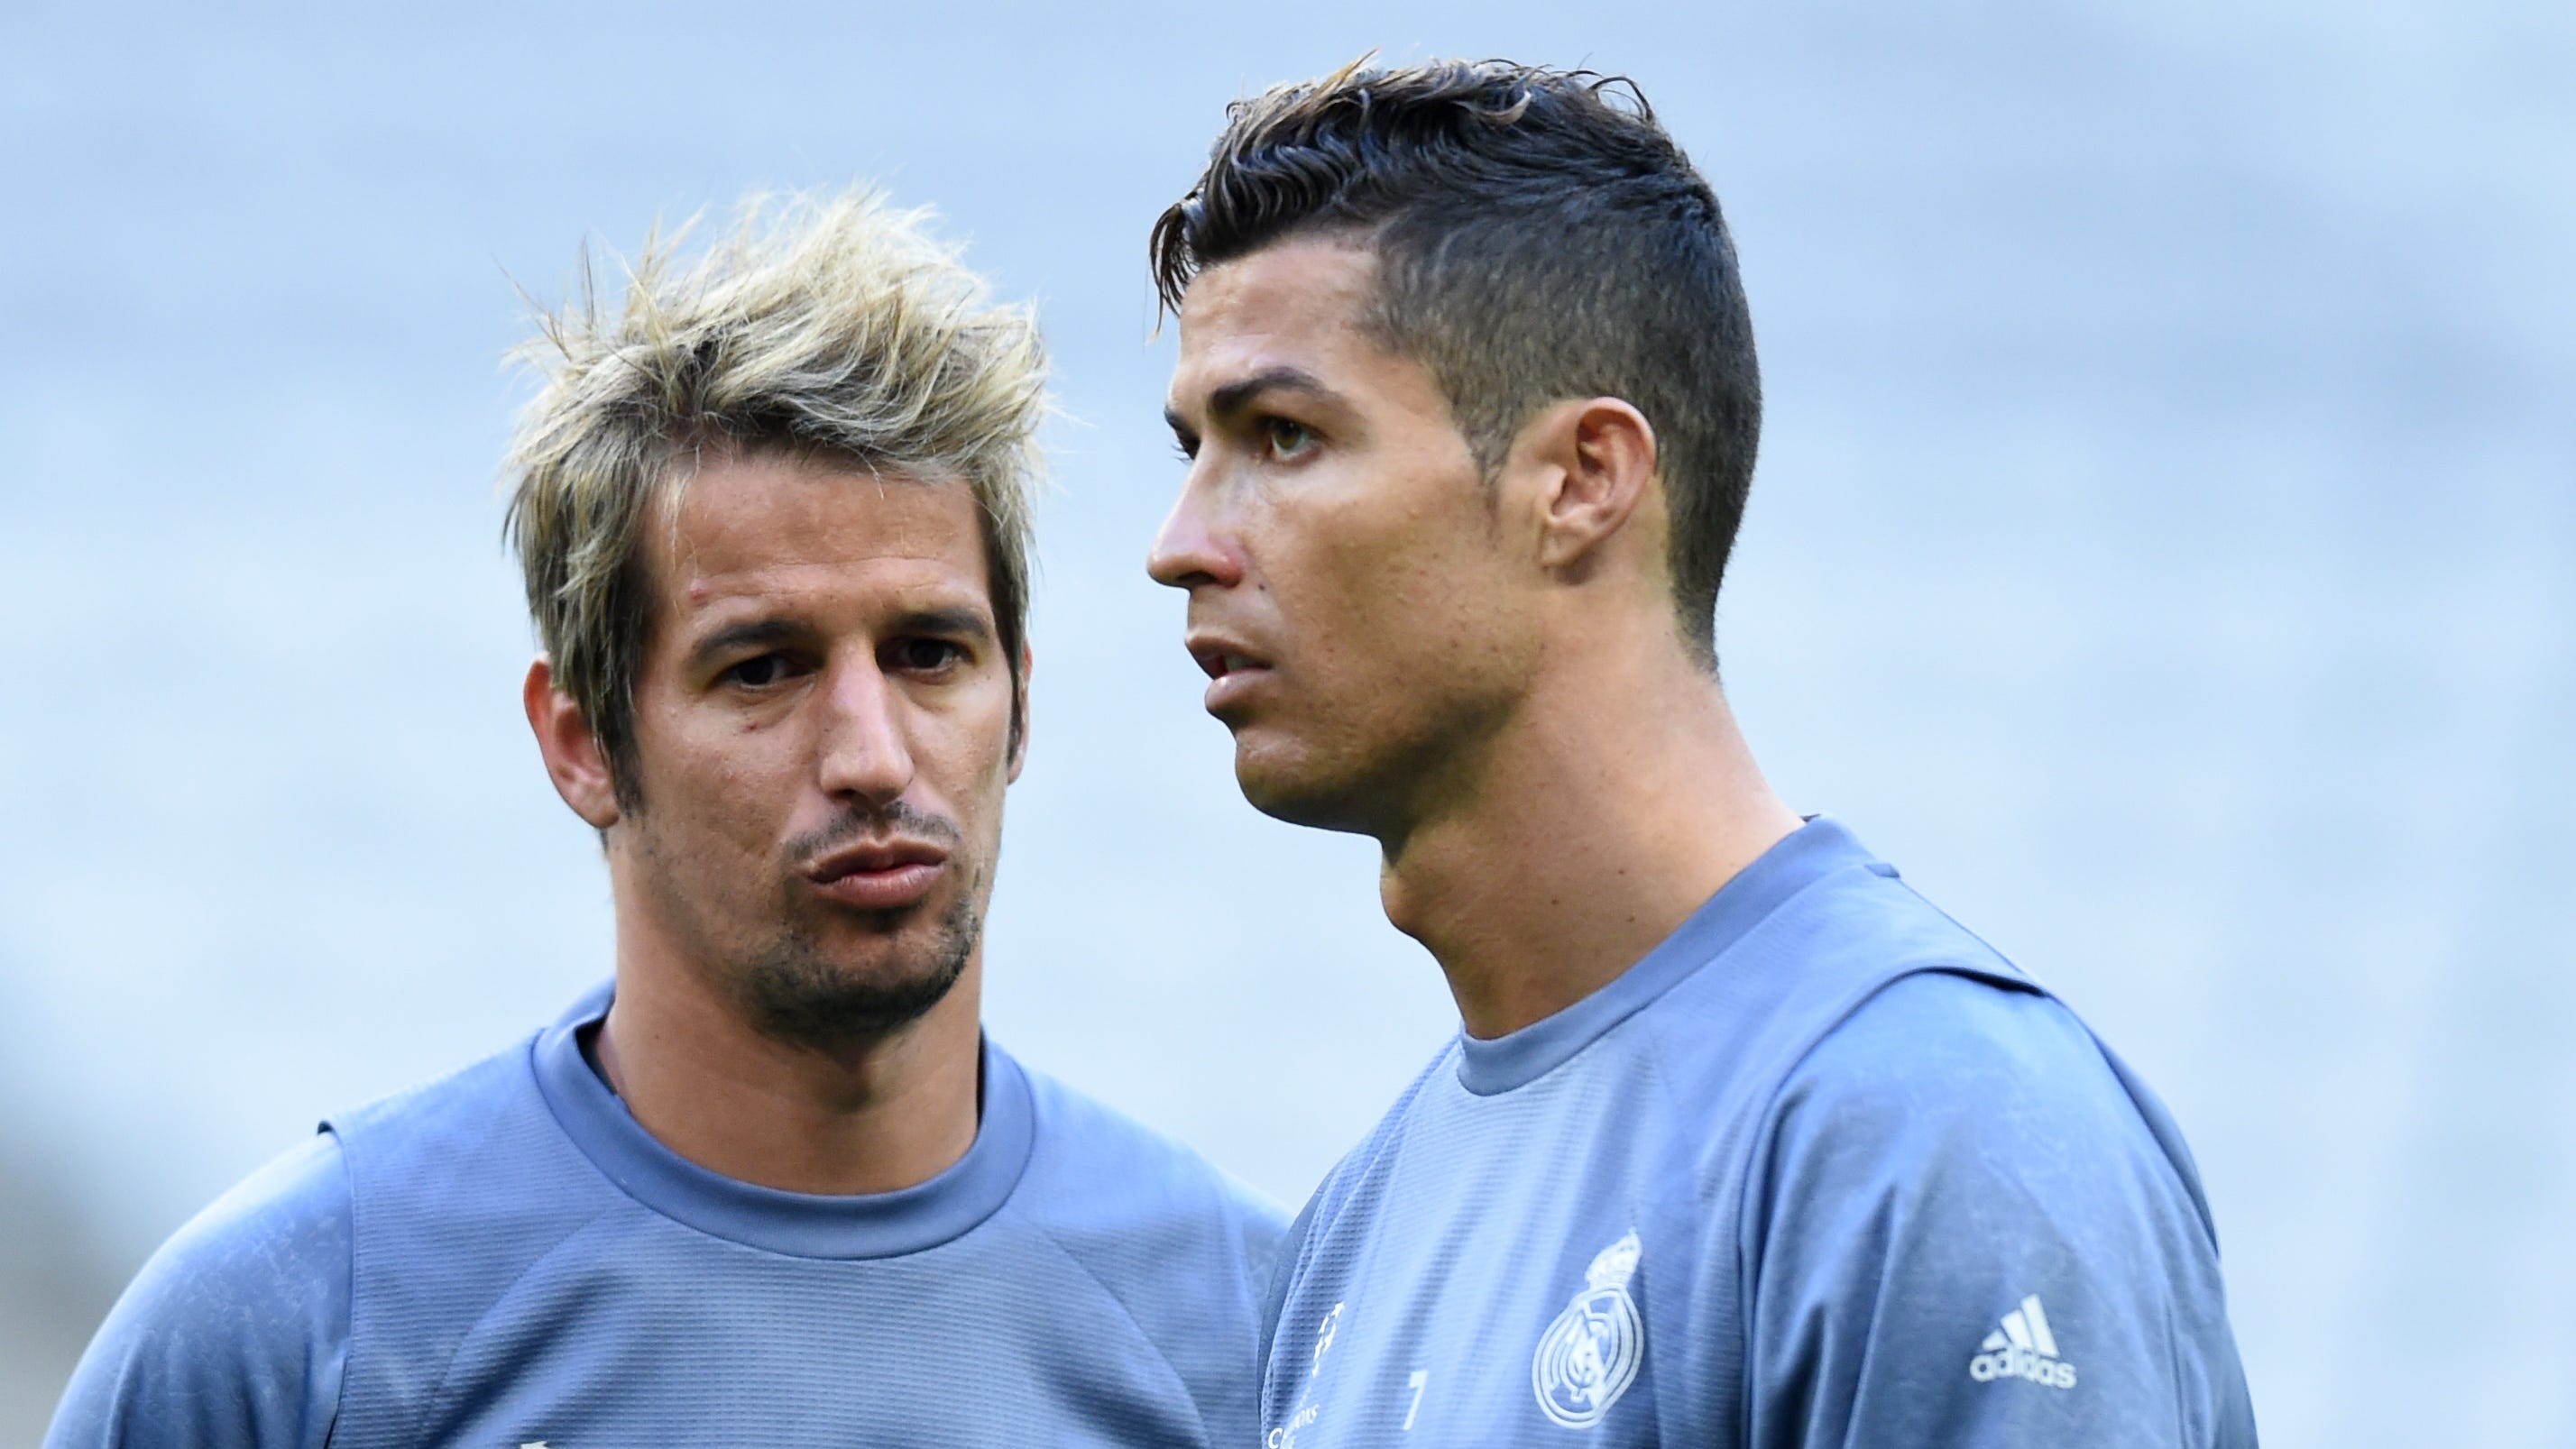 'They were nothing, they were sh*t' - Coentrao slams ex-players who criticise former team-mate Ronaldo | Goal.com US